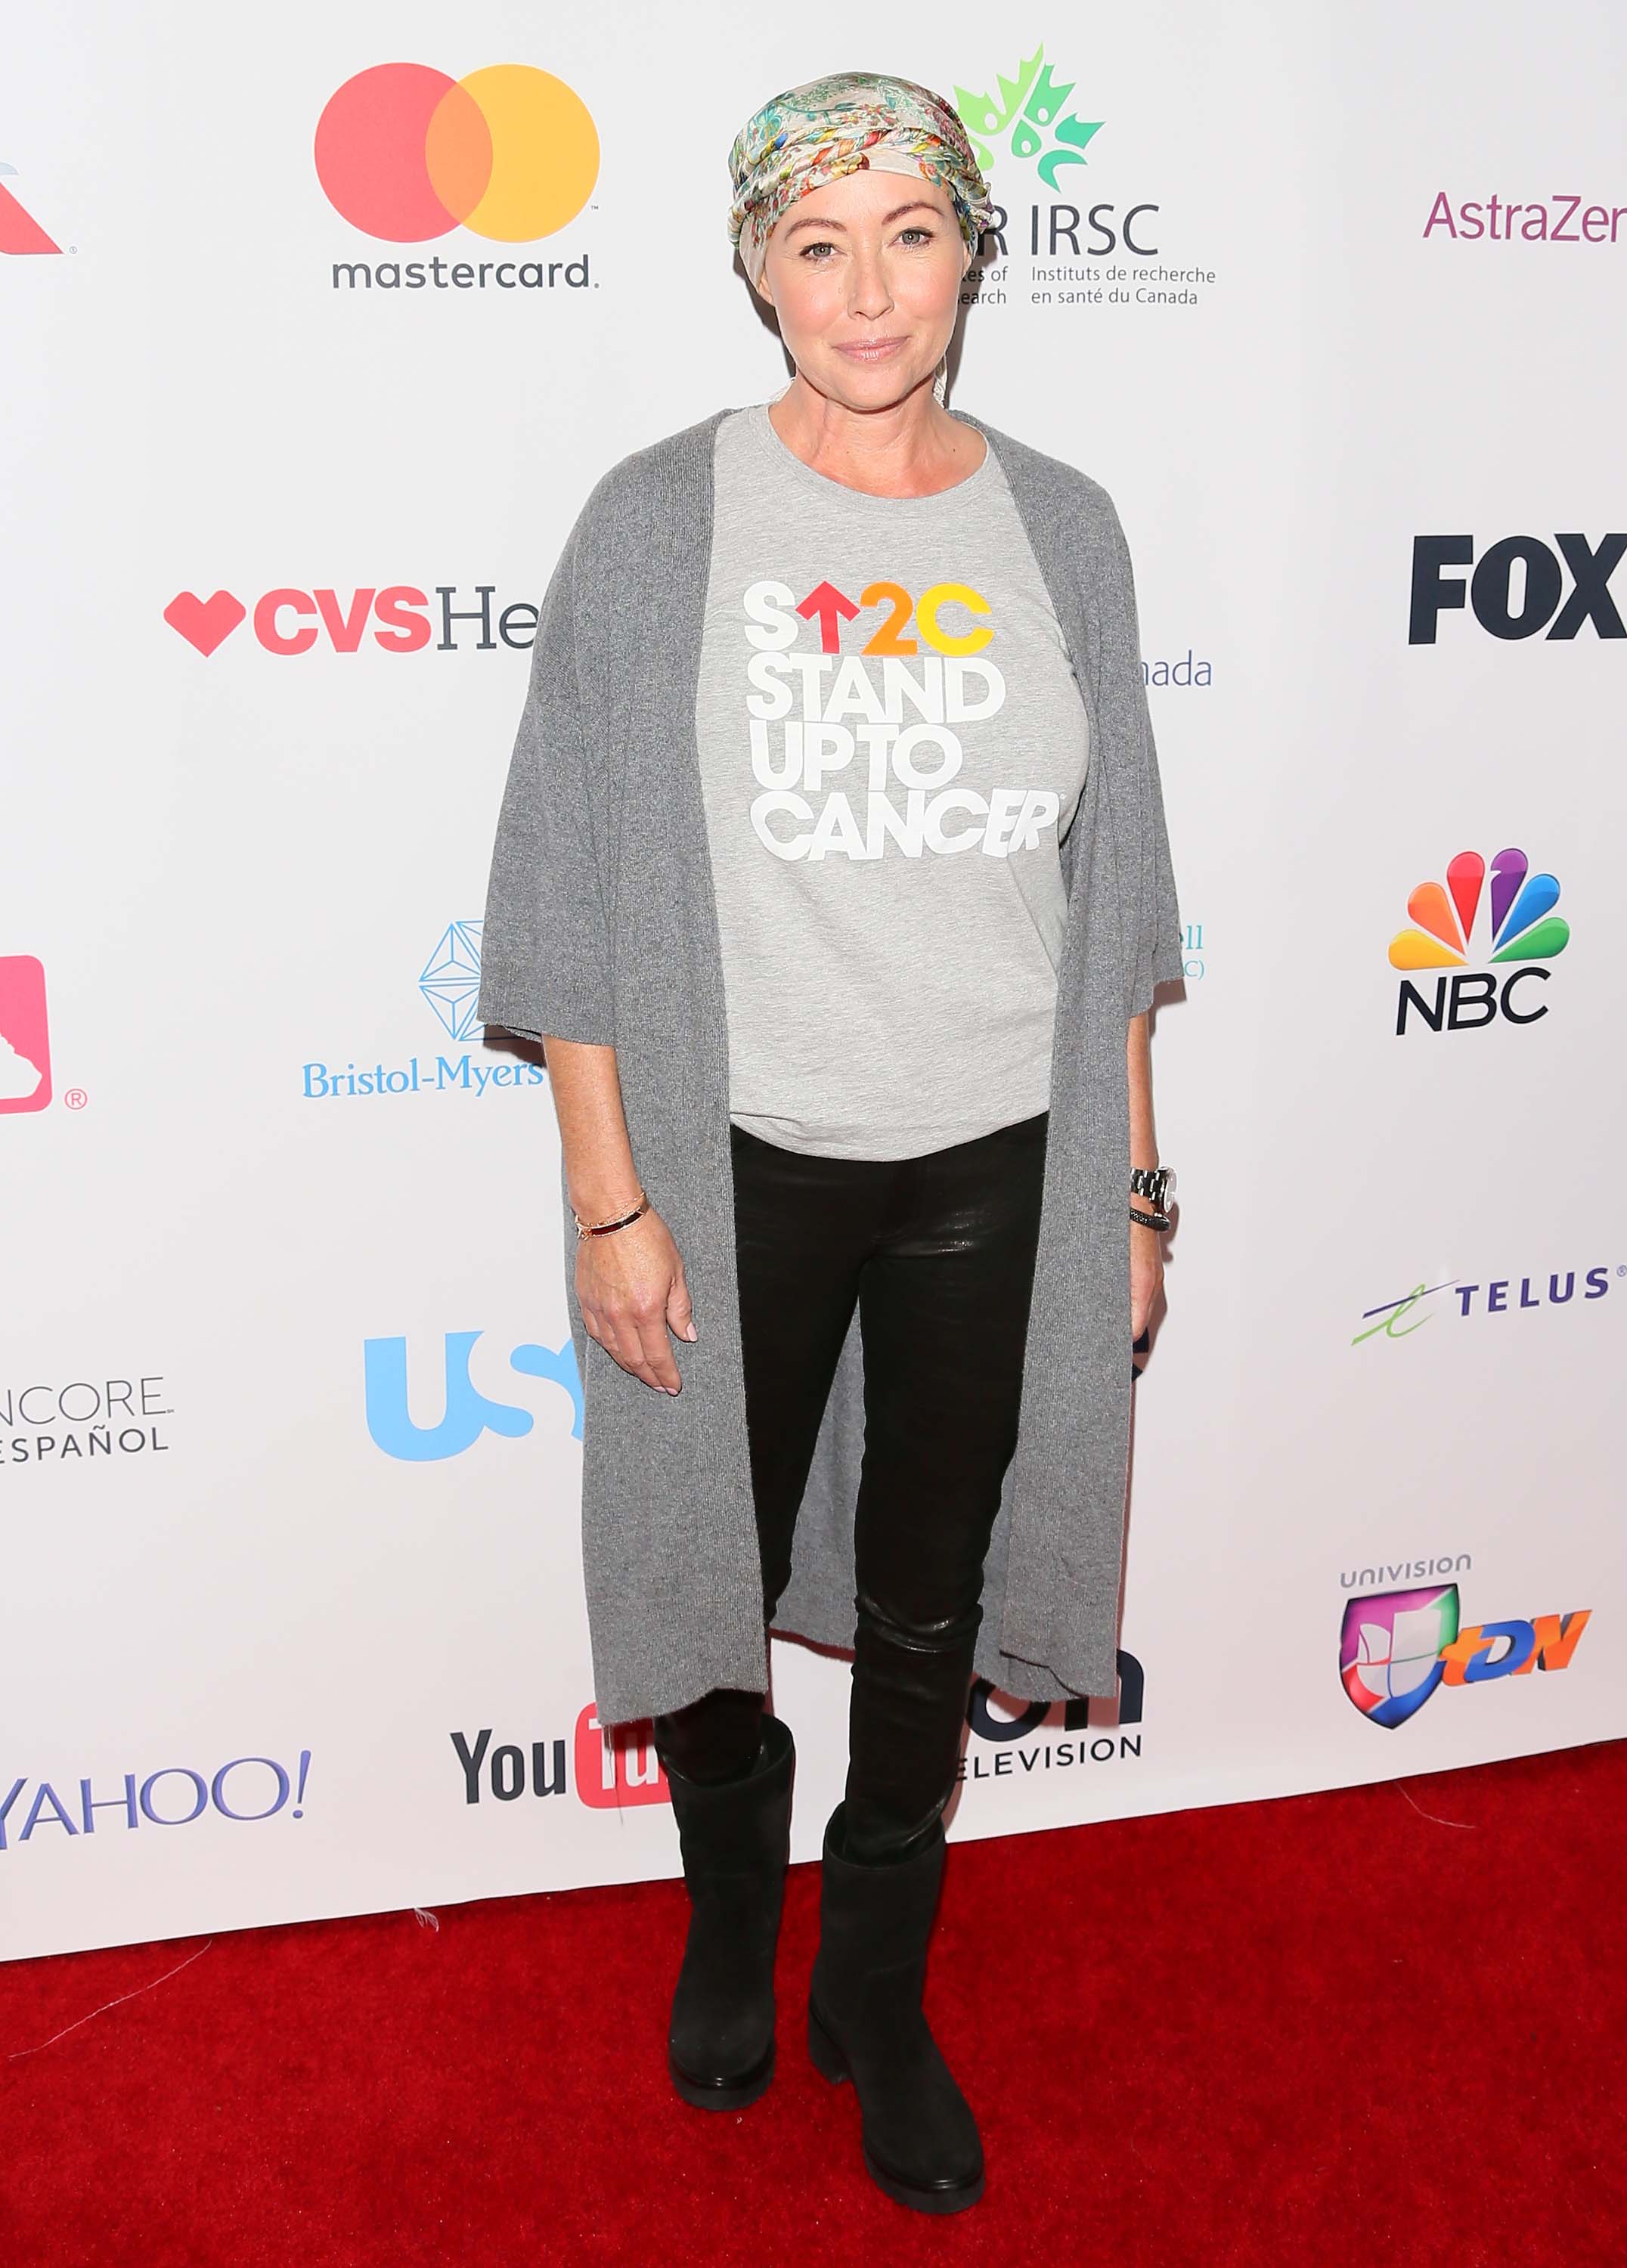 Shannen Doherty attends 5th Biennial Stand Up To Cancer